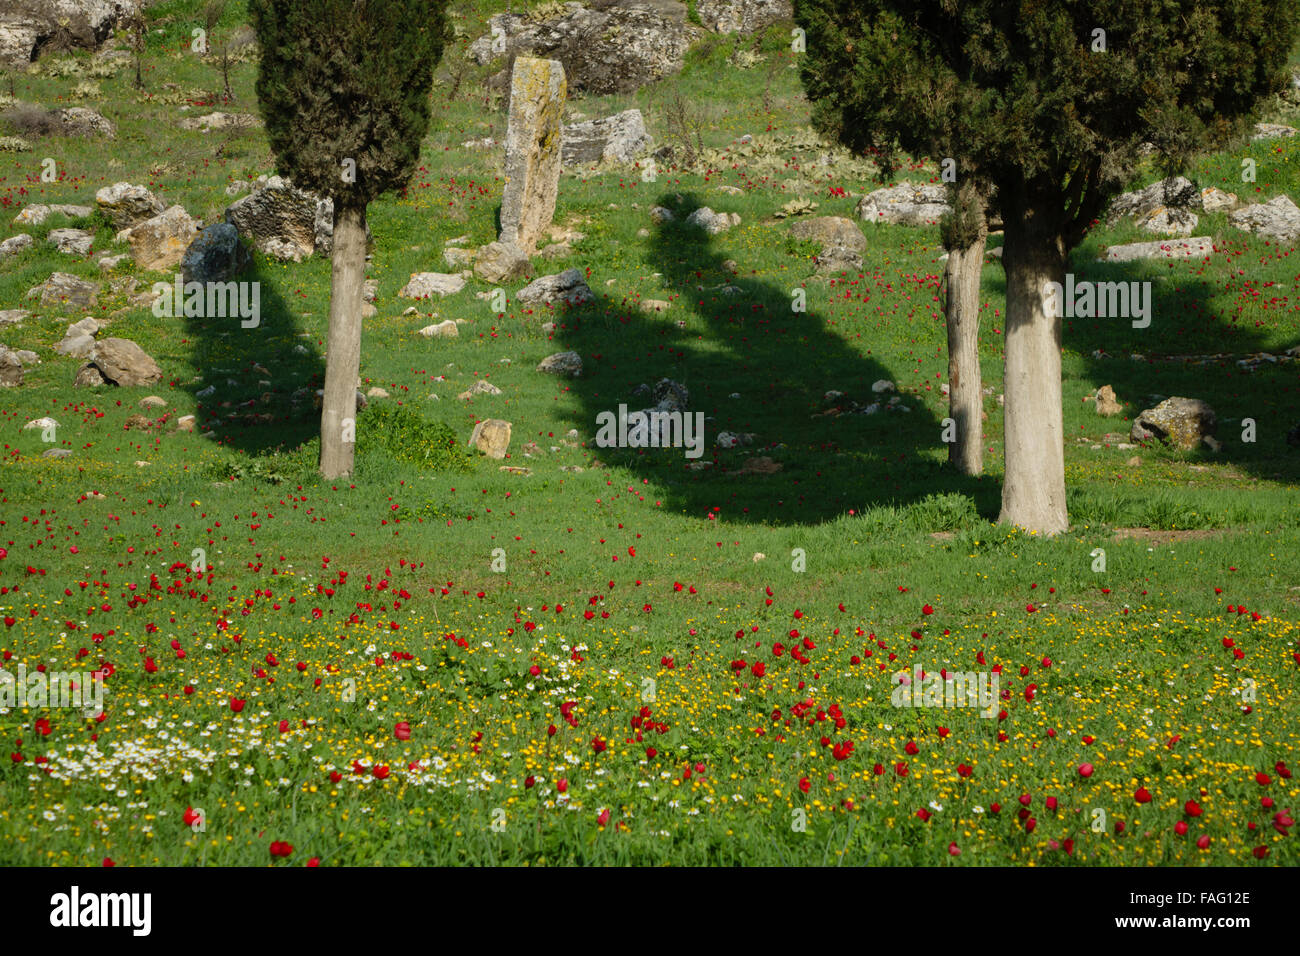 Turkey travel - Hierapolis, spring flowers and landscape with mountain, meadows, trees. Stock Photo